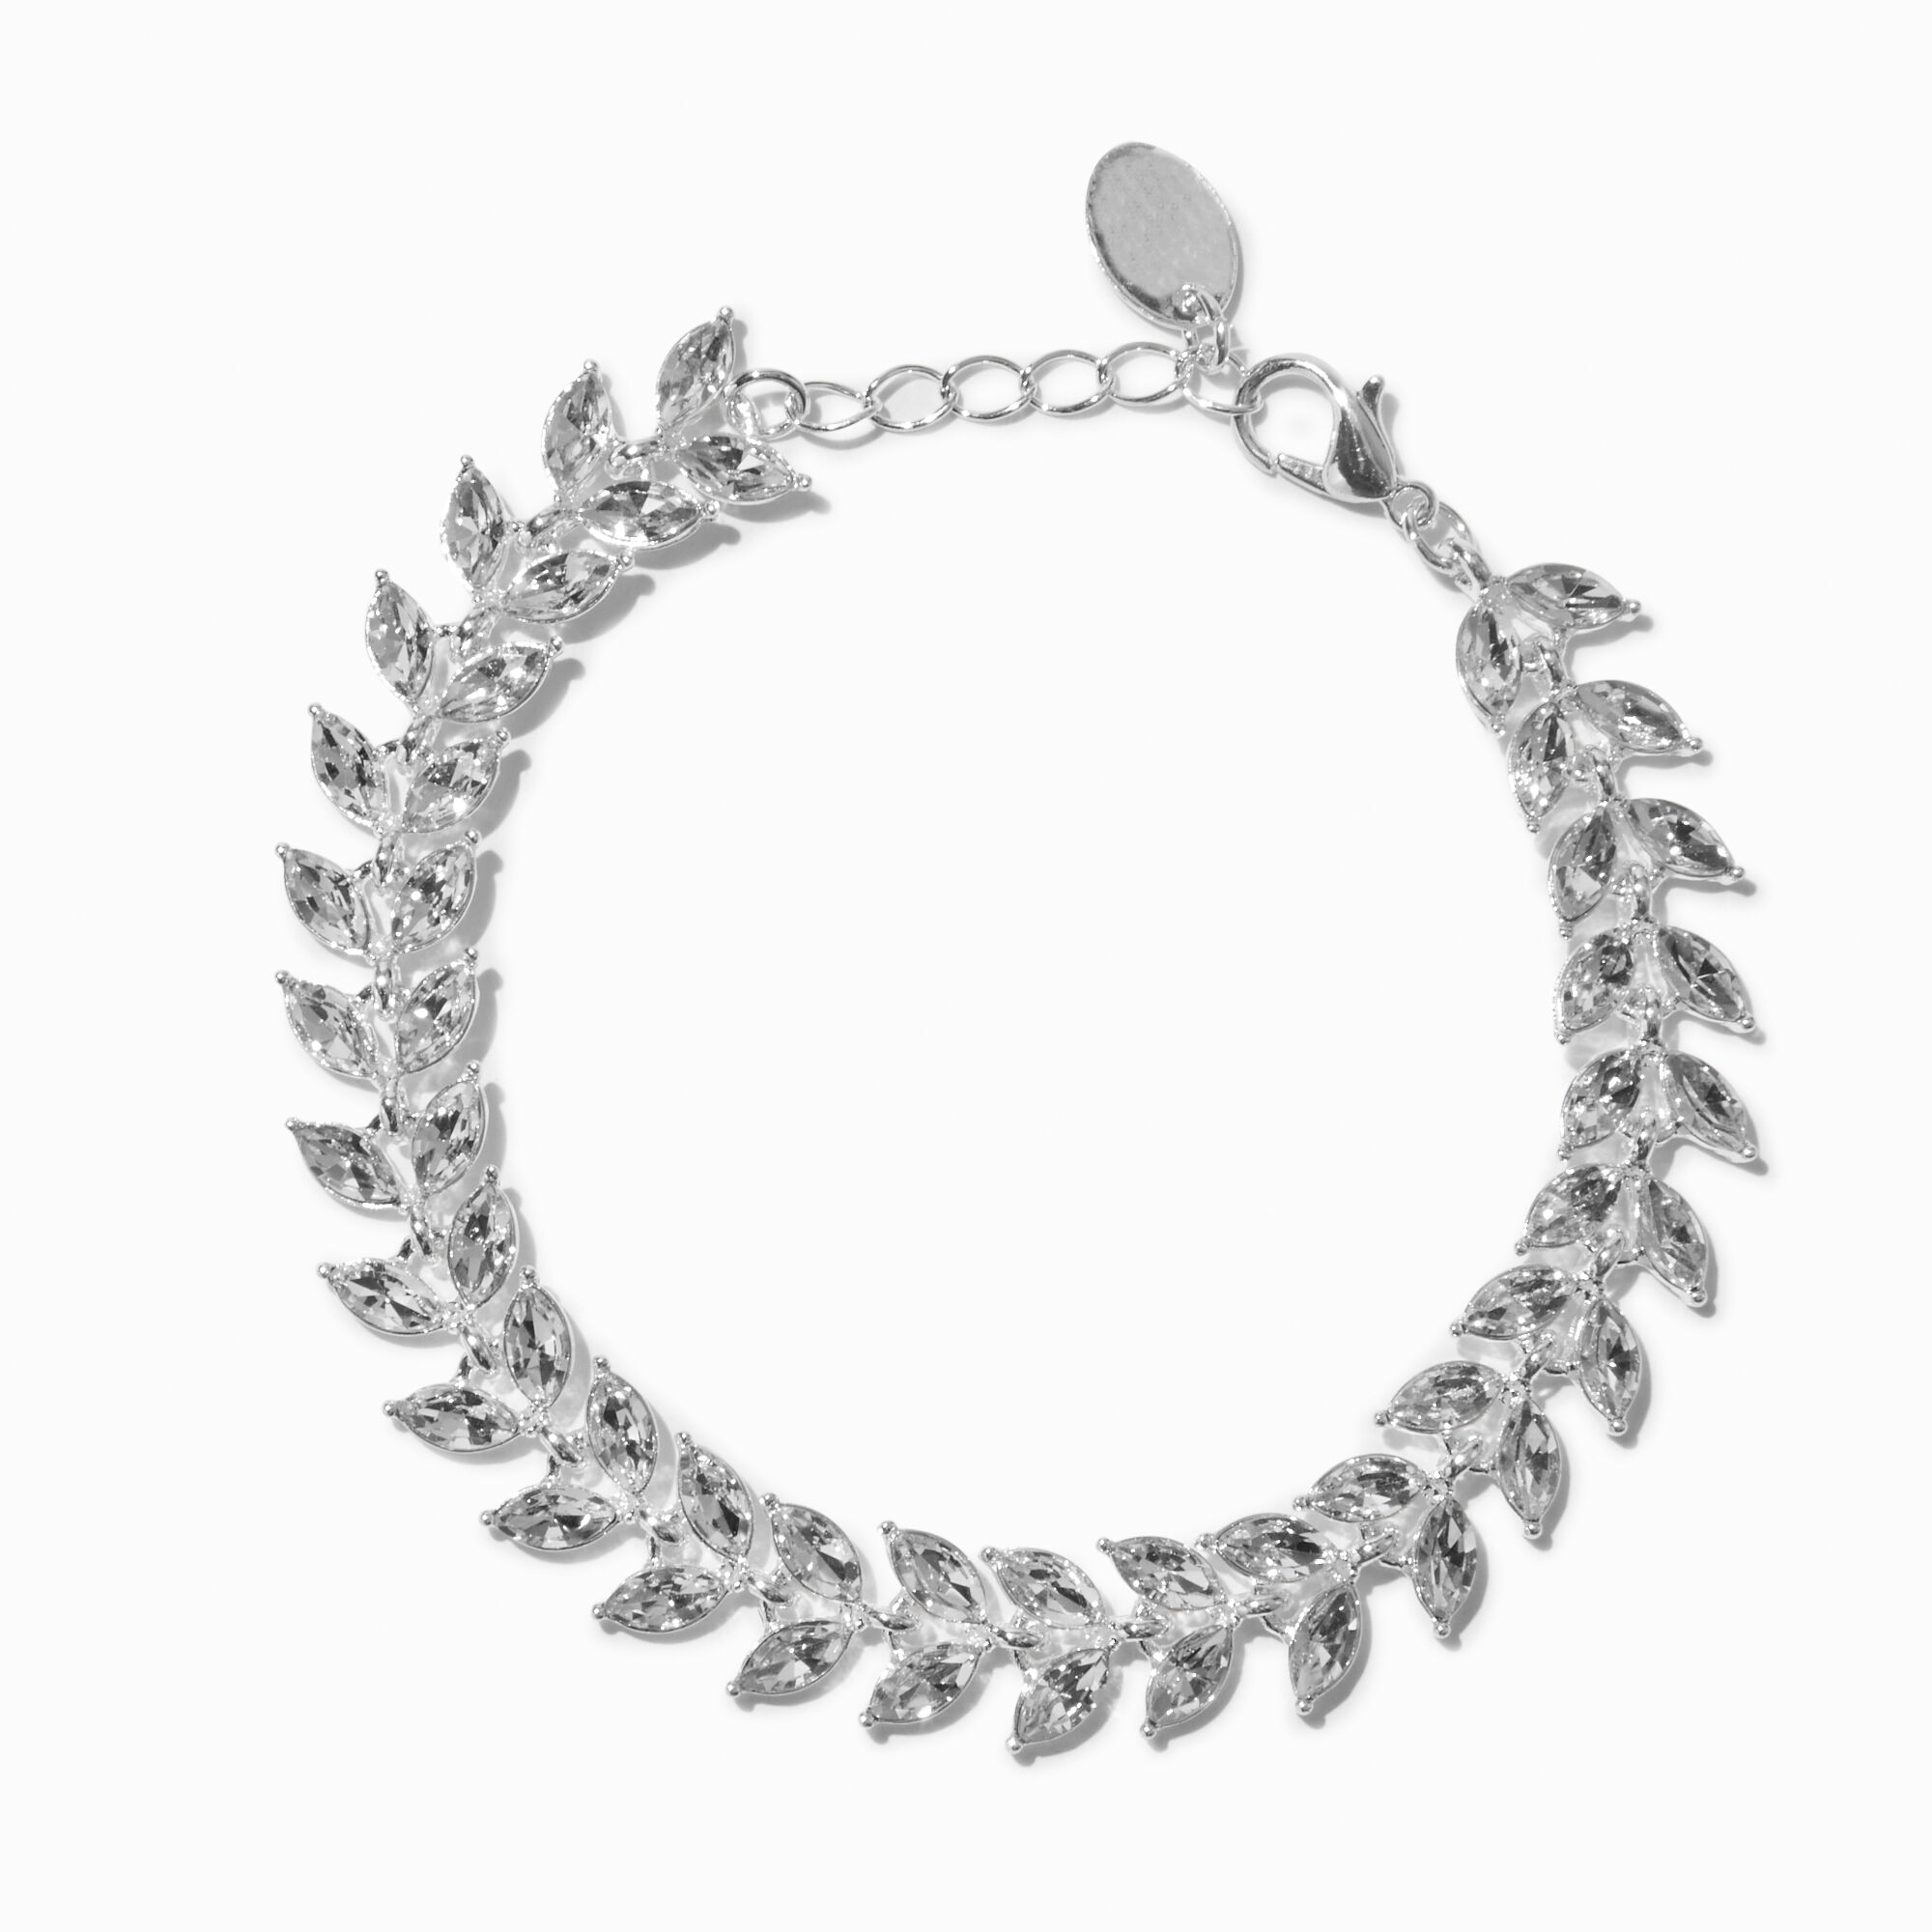 View Claires Rhinestone Leaves Tone Chain Bracelet Silver information